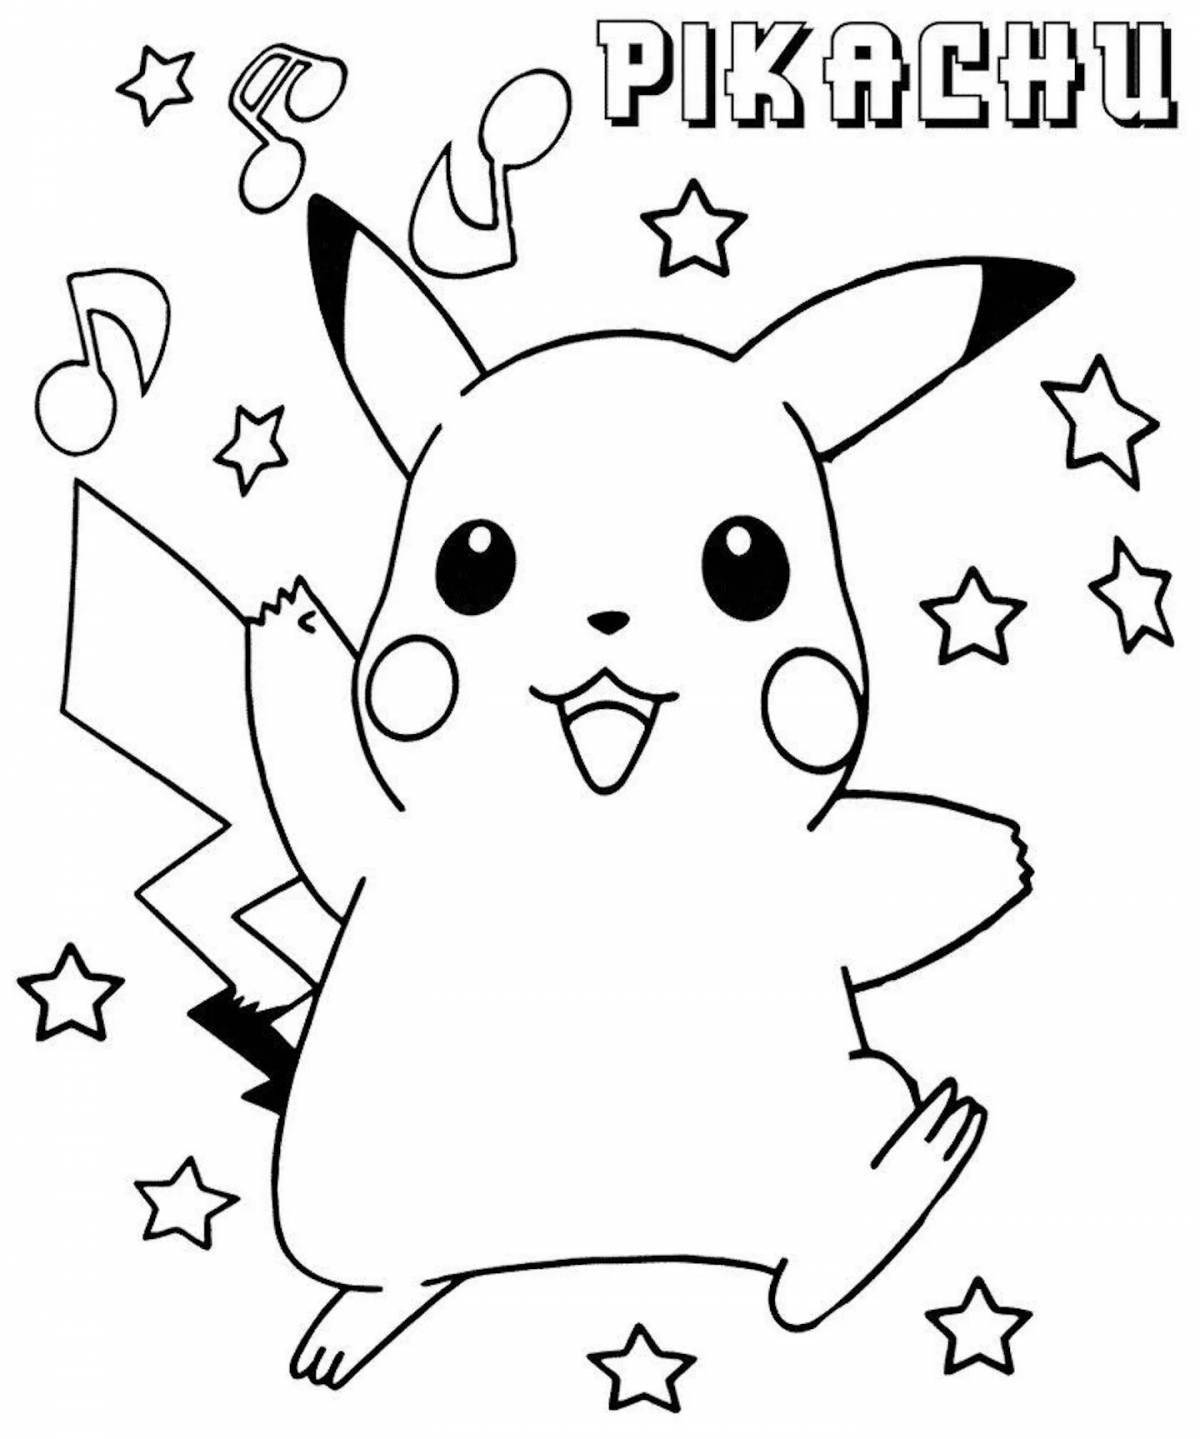 Pikachu holiday coloring page